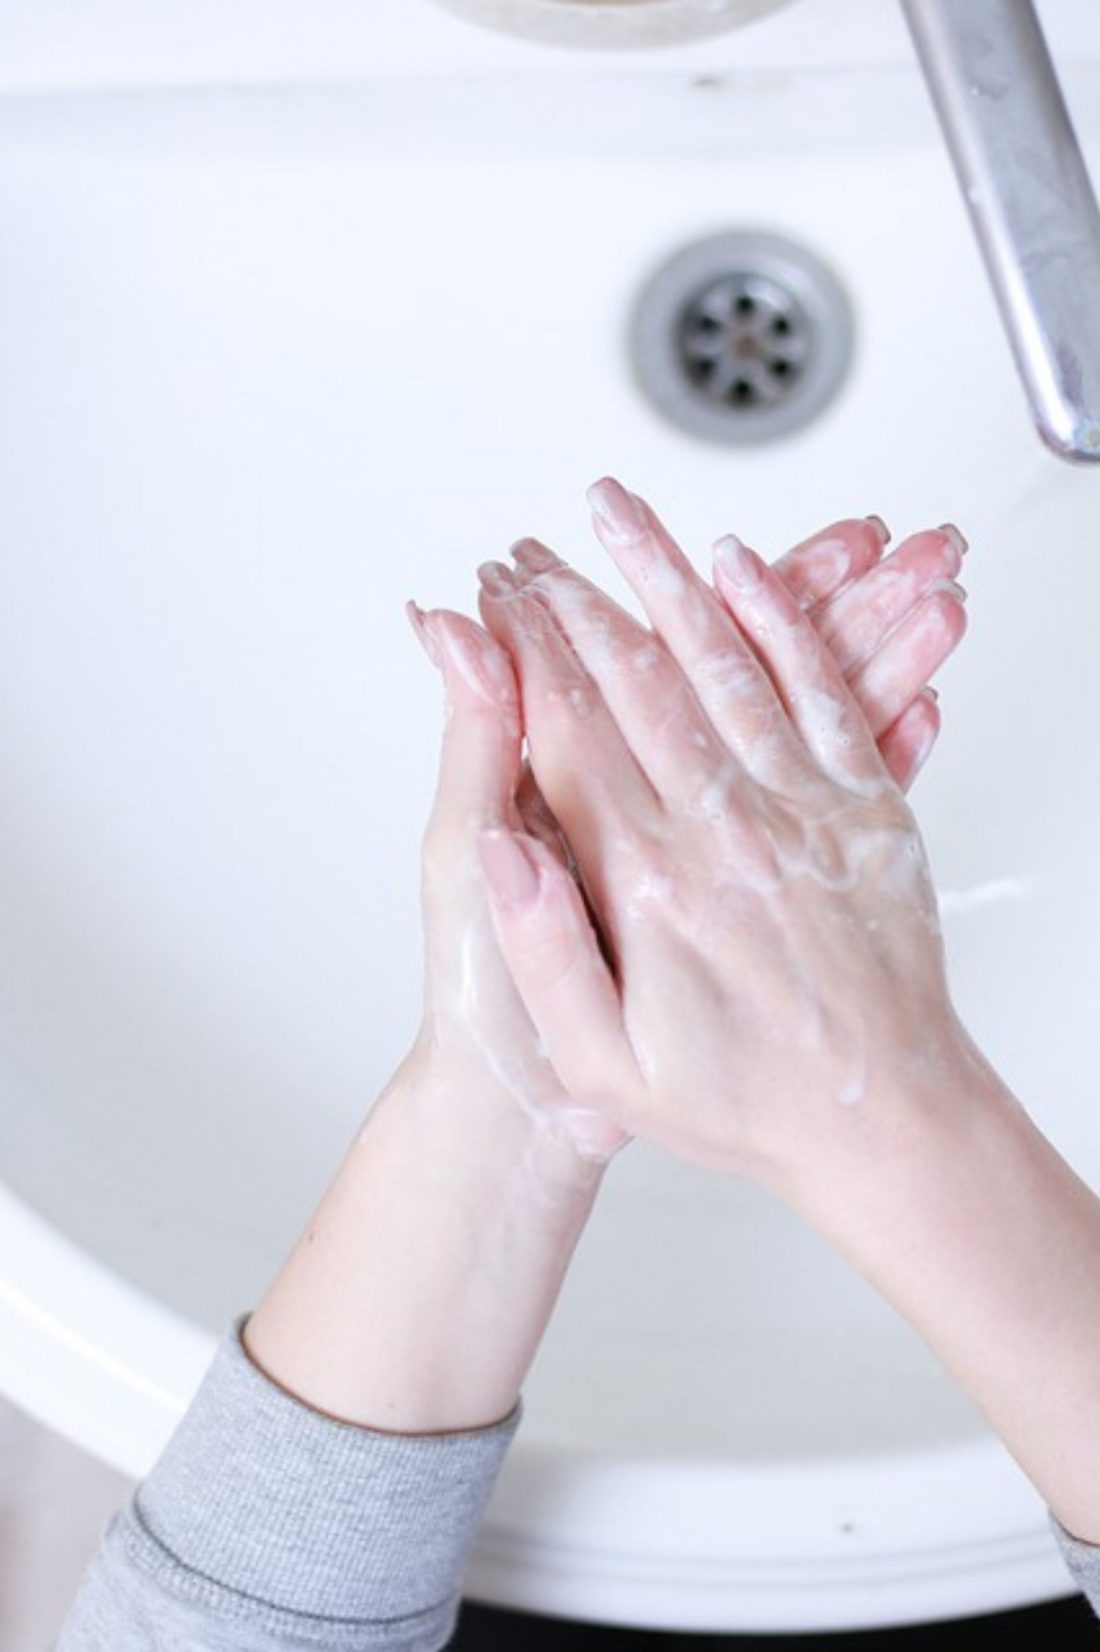 Effective Hygiene Tips To Protect Your Health All-Year Round - Rita Reviews